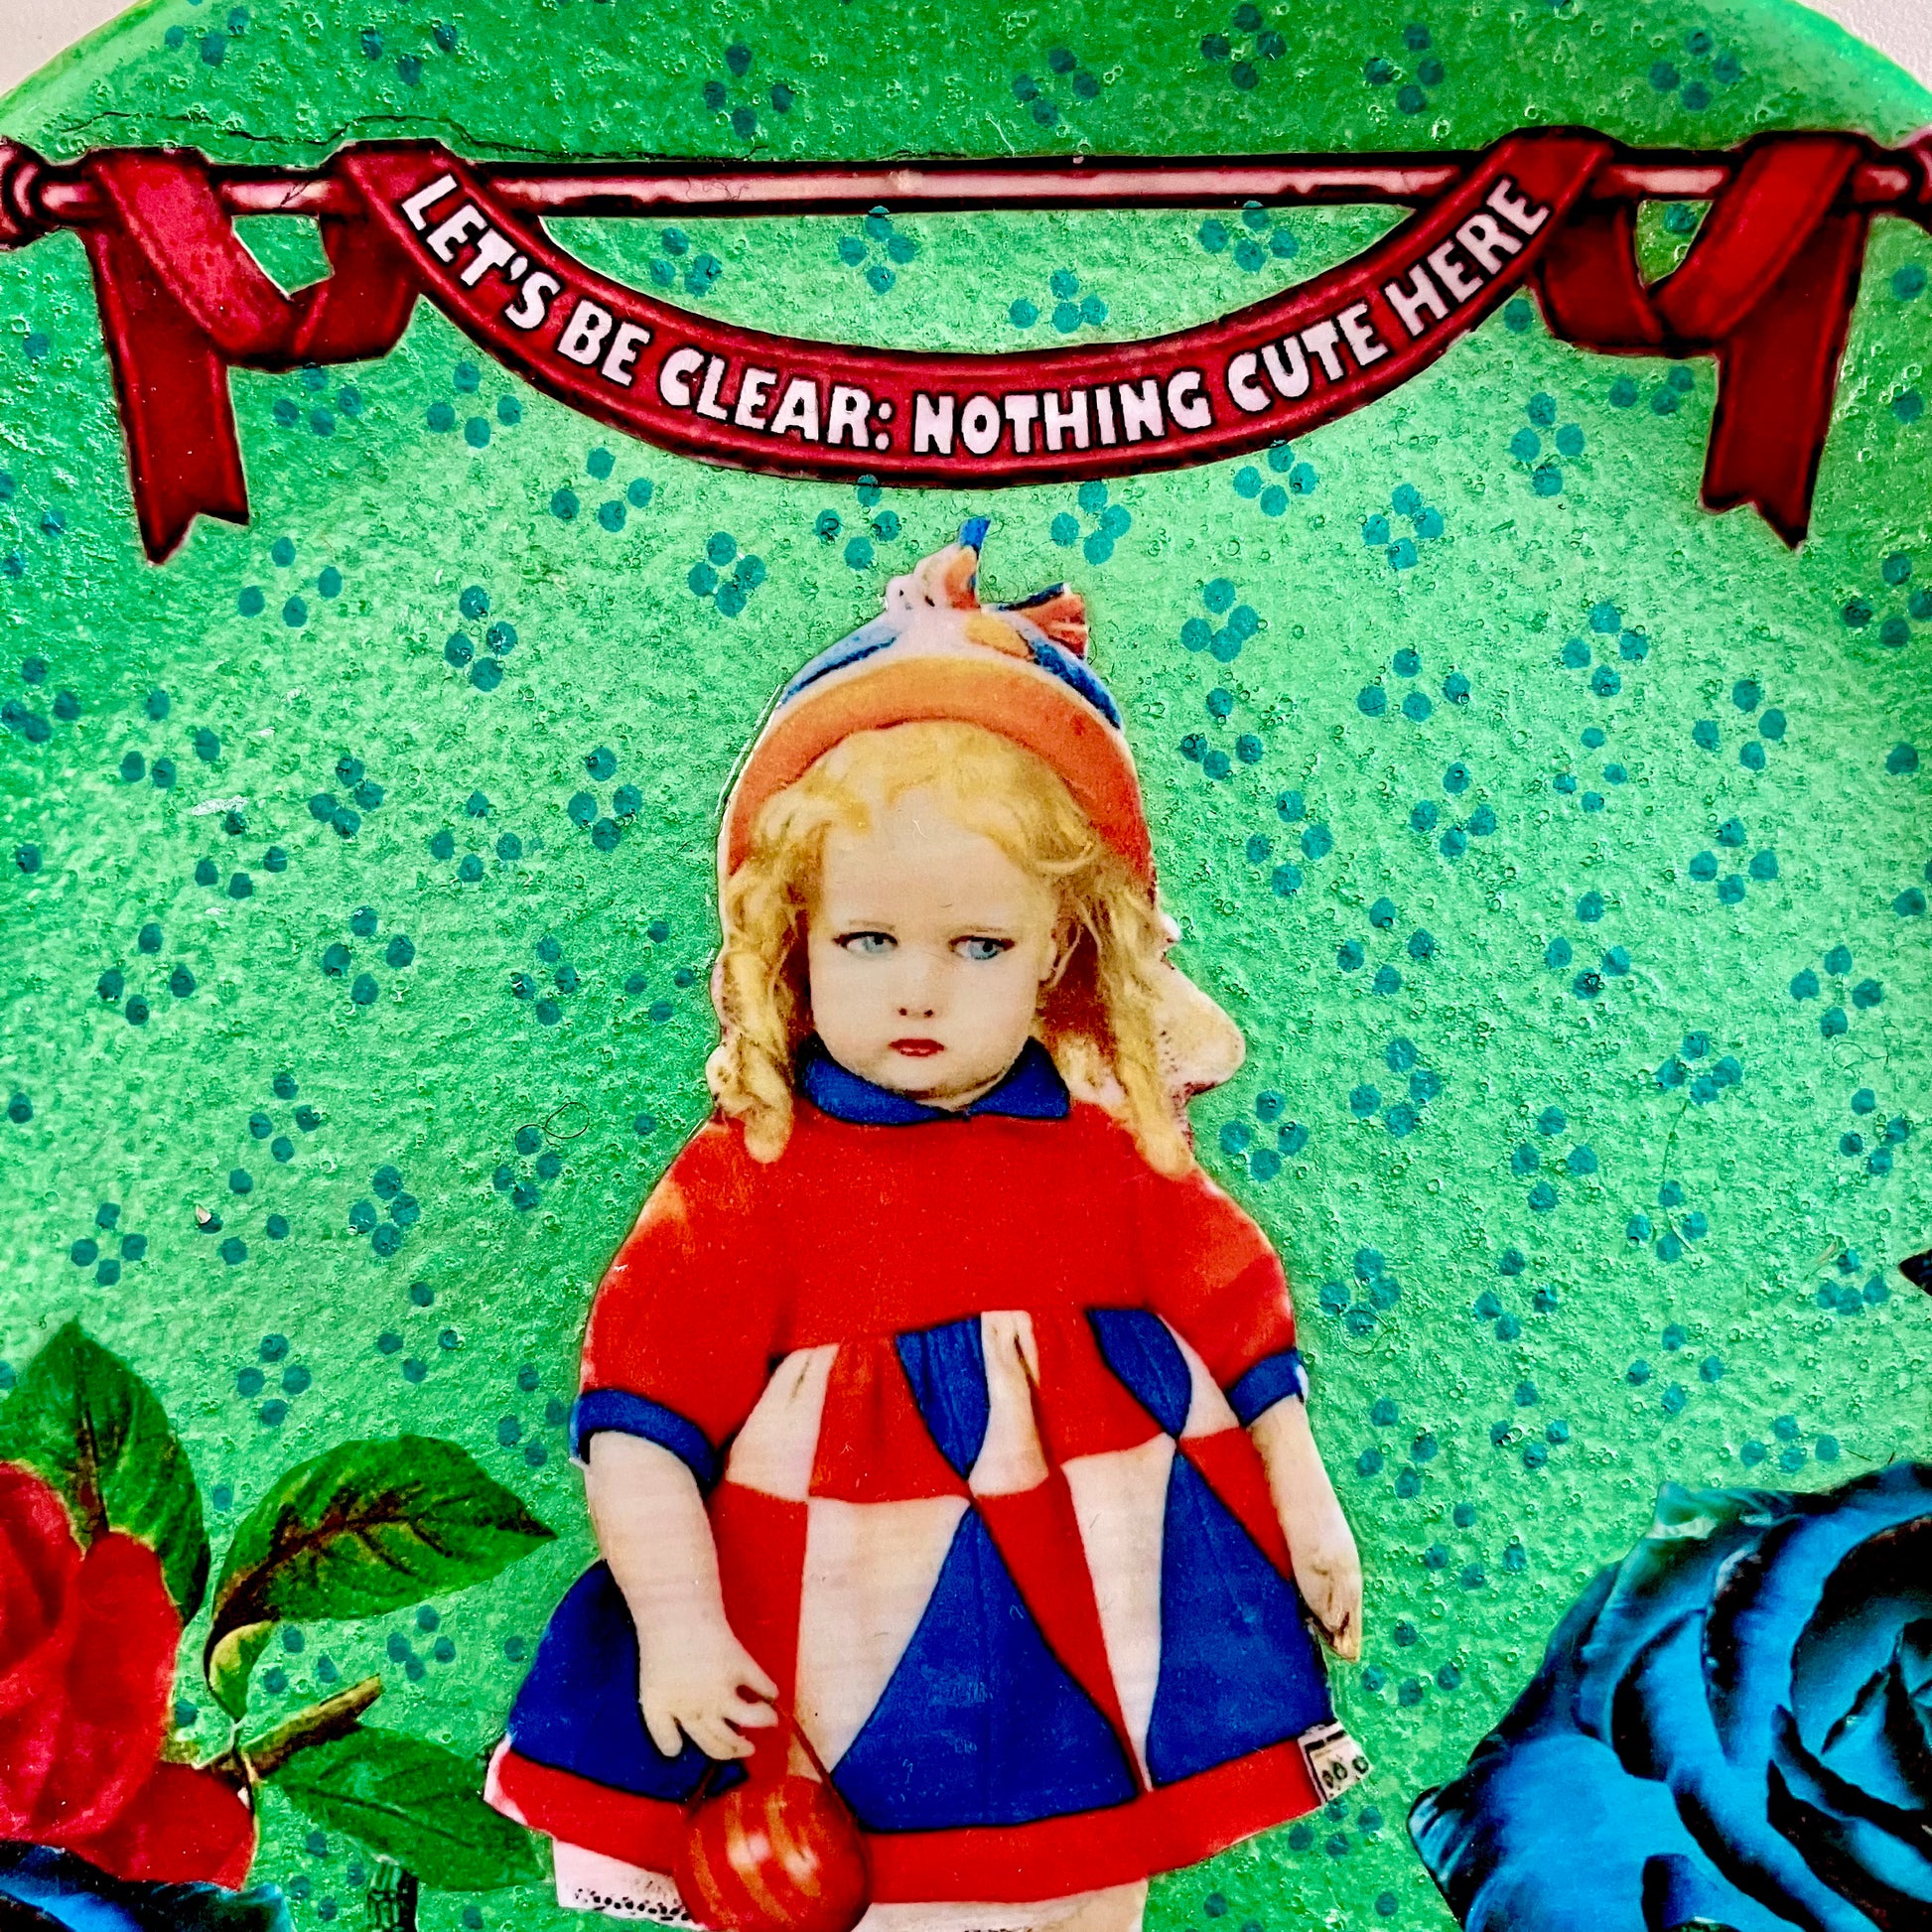 "Let's Be Clear: Nothing Cute Here" Wall Plate by House of Frisson, closeup detail of the collage, showing a vintage doll, and roses, on a metallic green background.